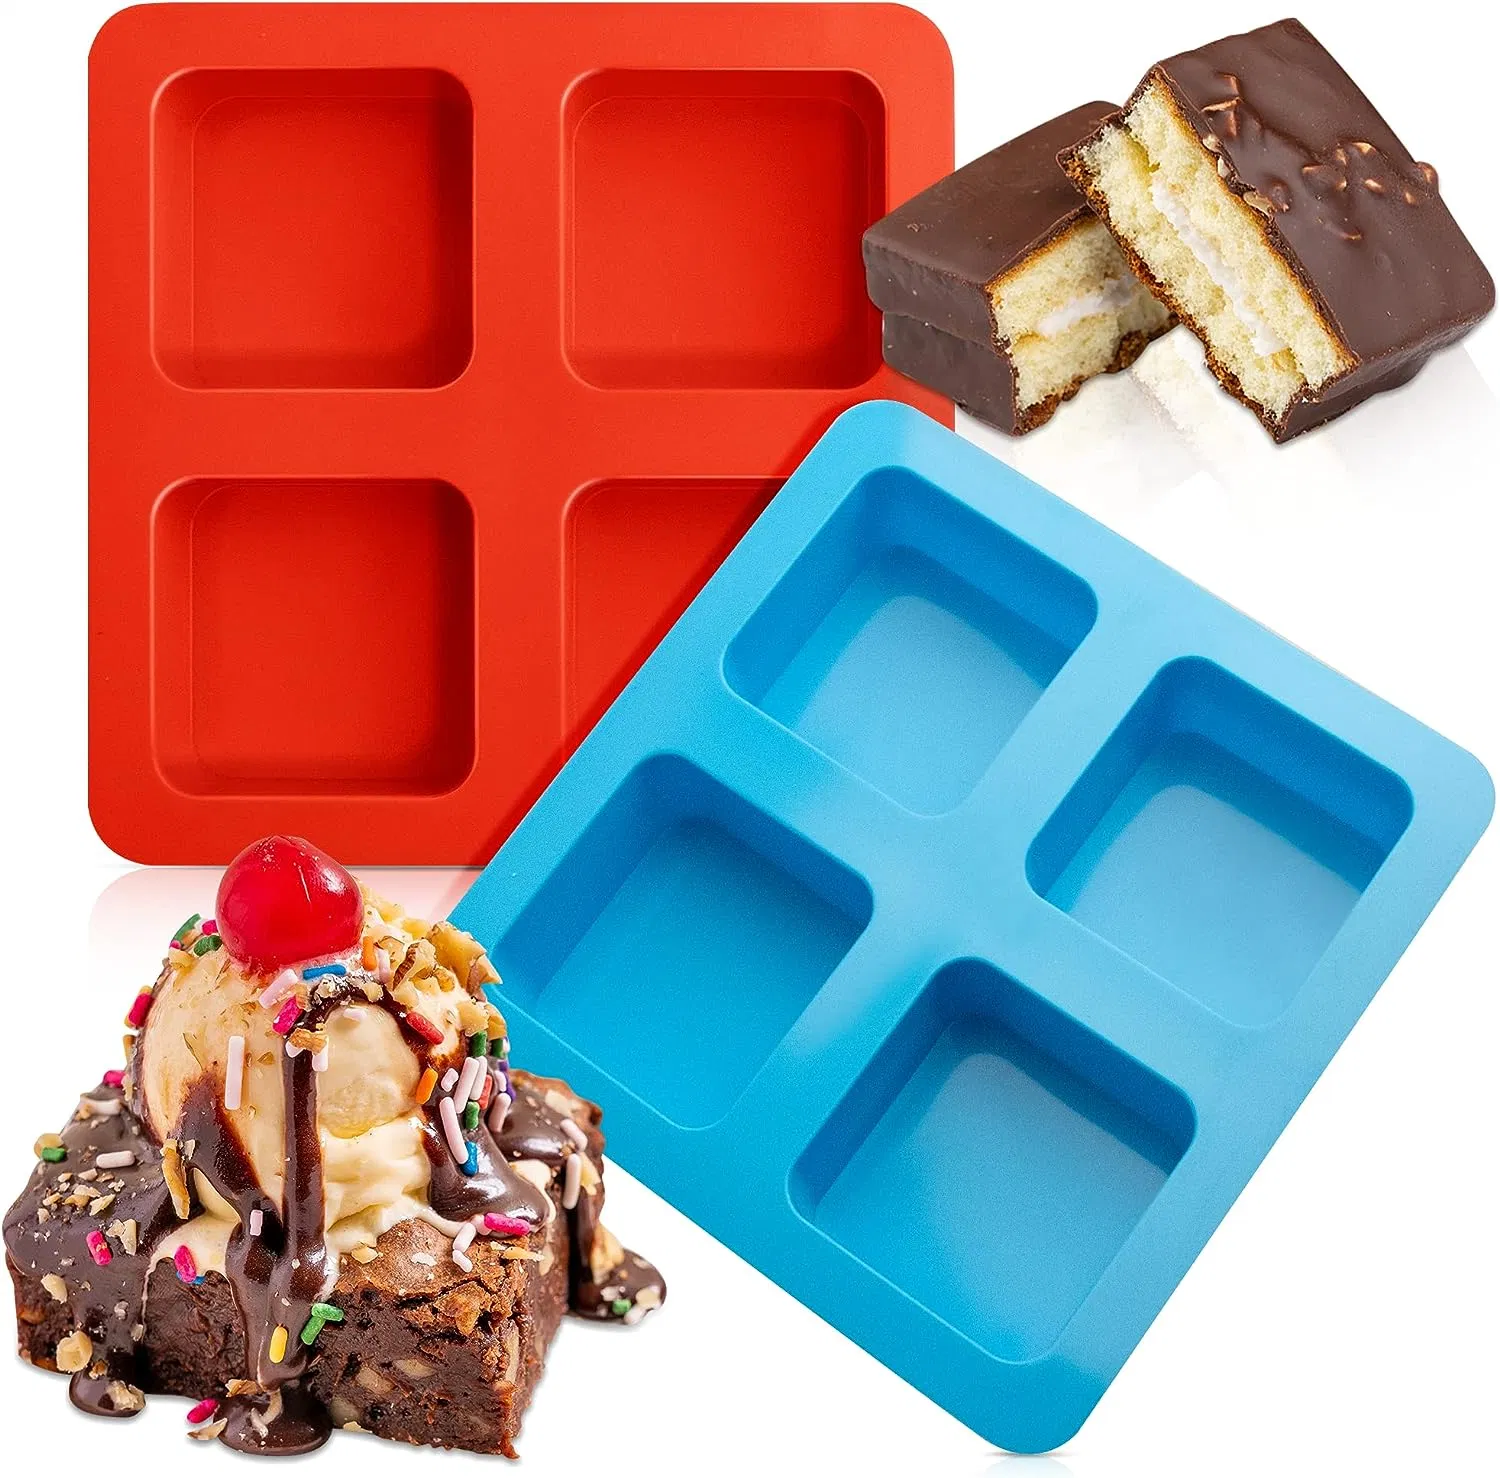 Non-Stick Square Baking Molds for Chocolate Covered Muffin and Cakes